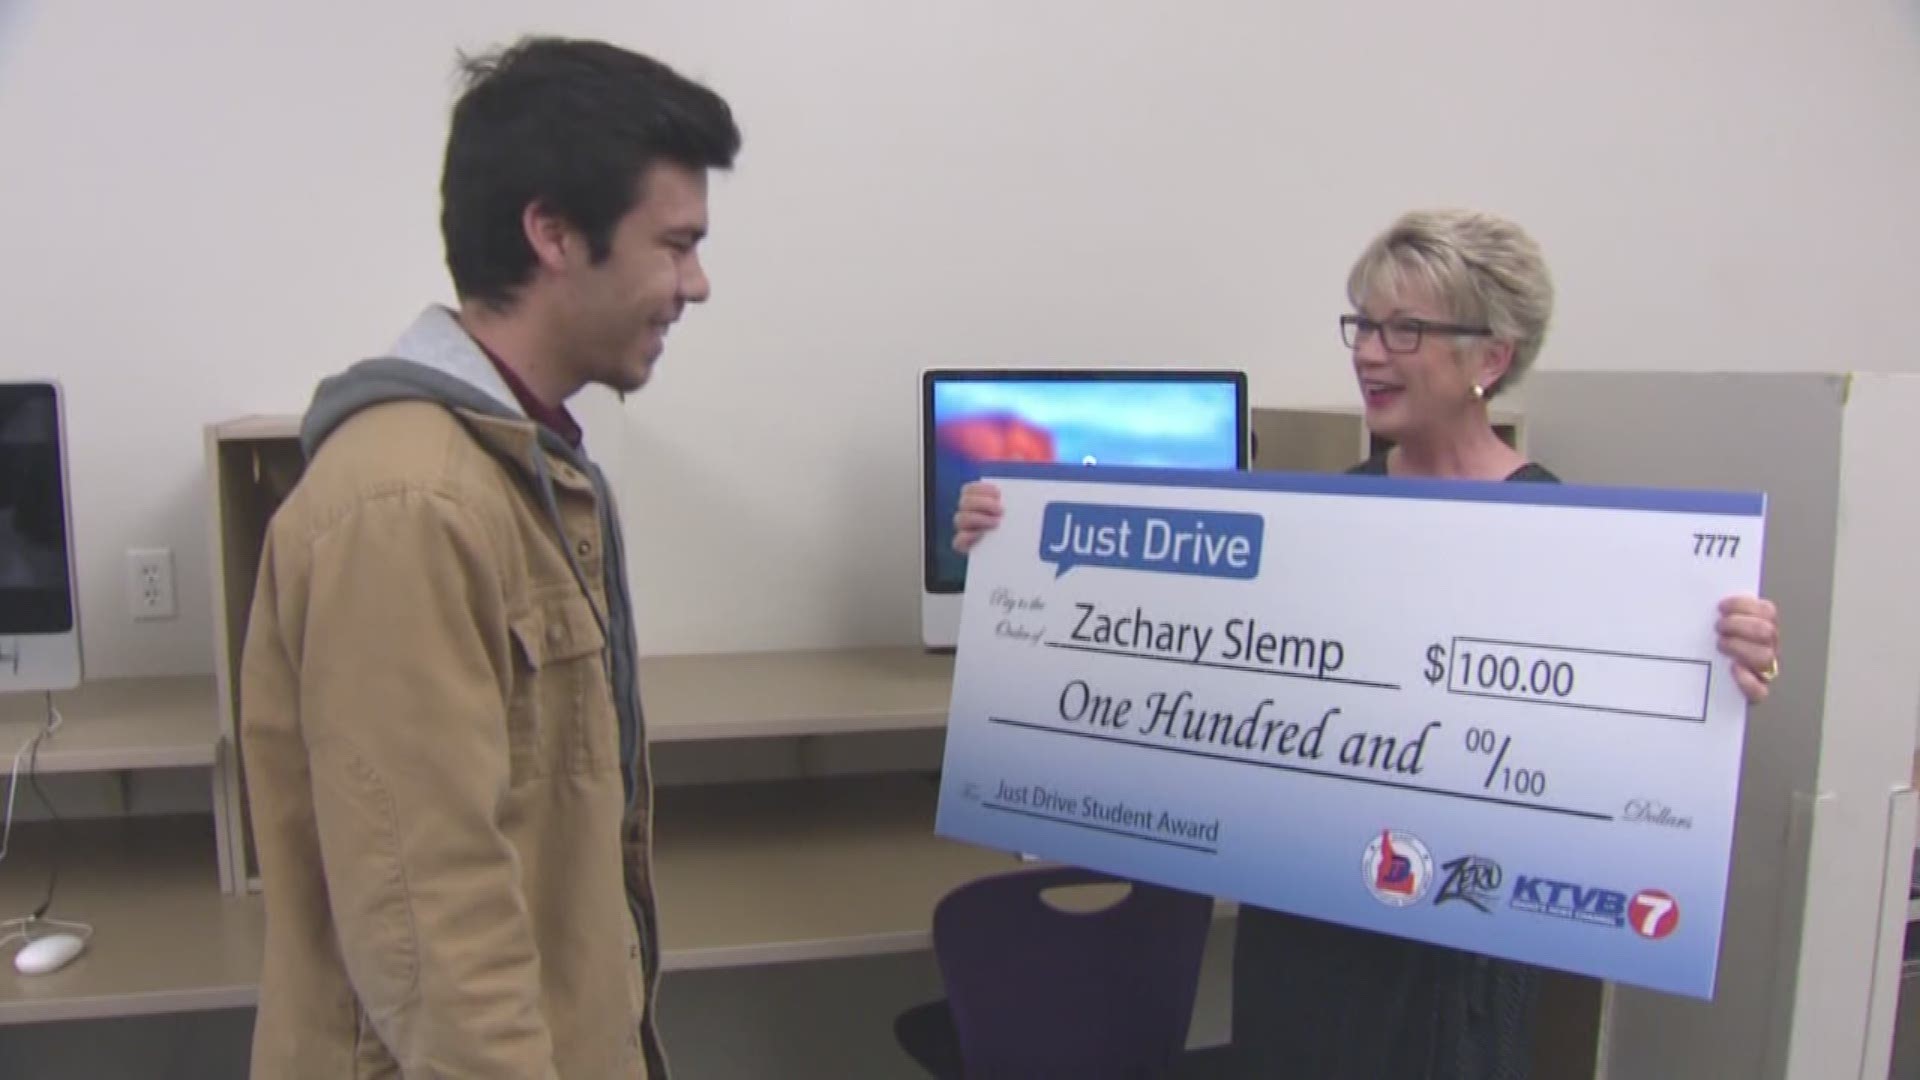 Just drive video contest runner up: Zachary Slemp